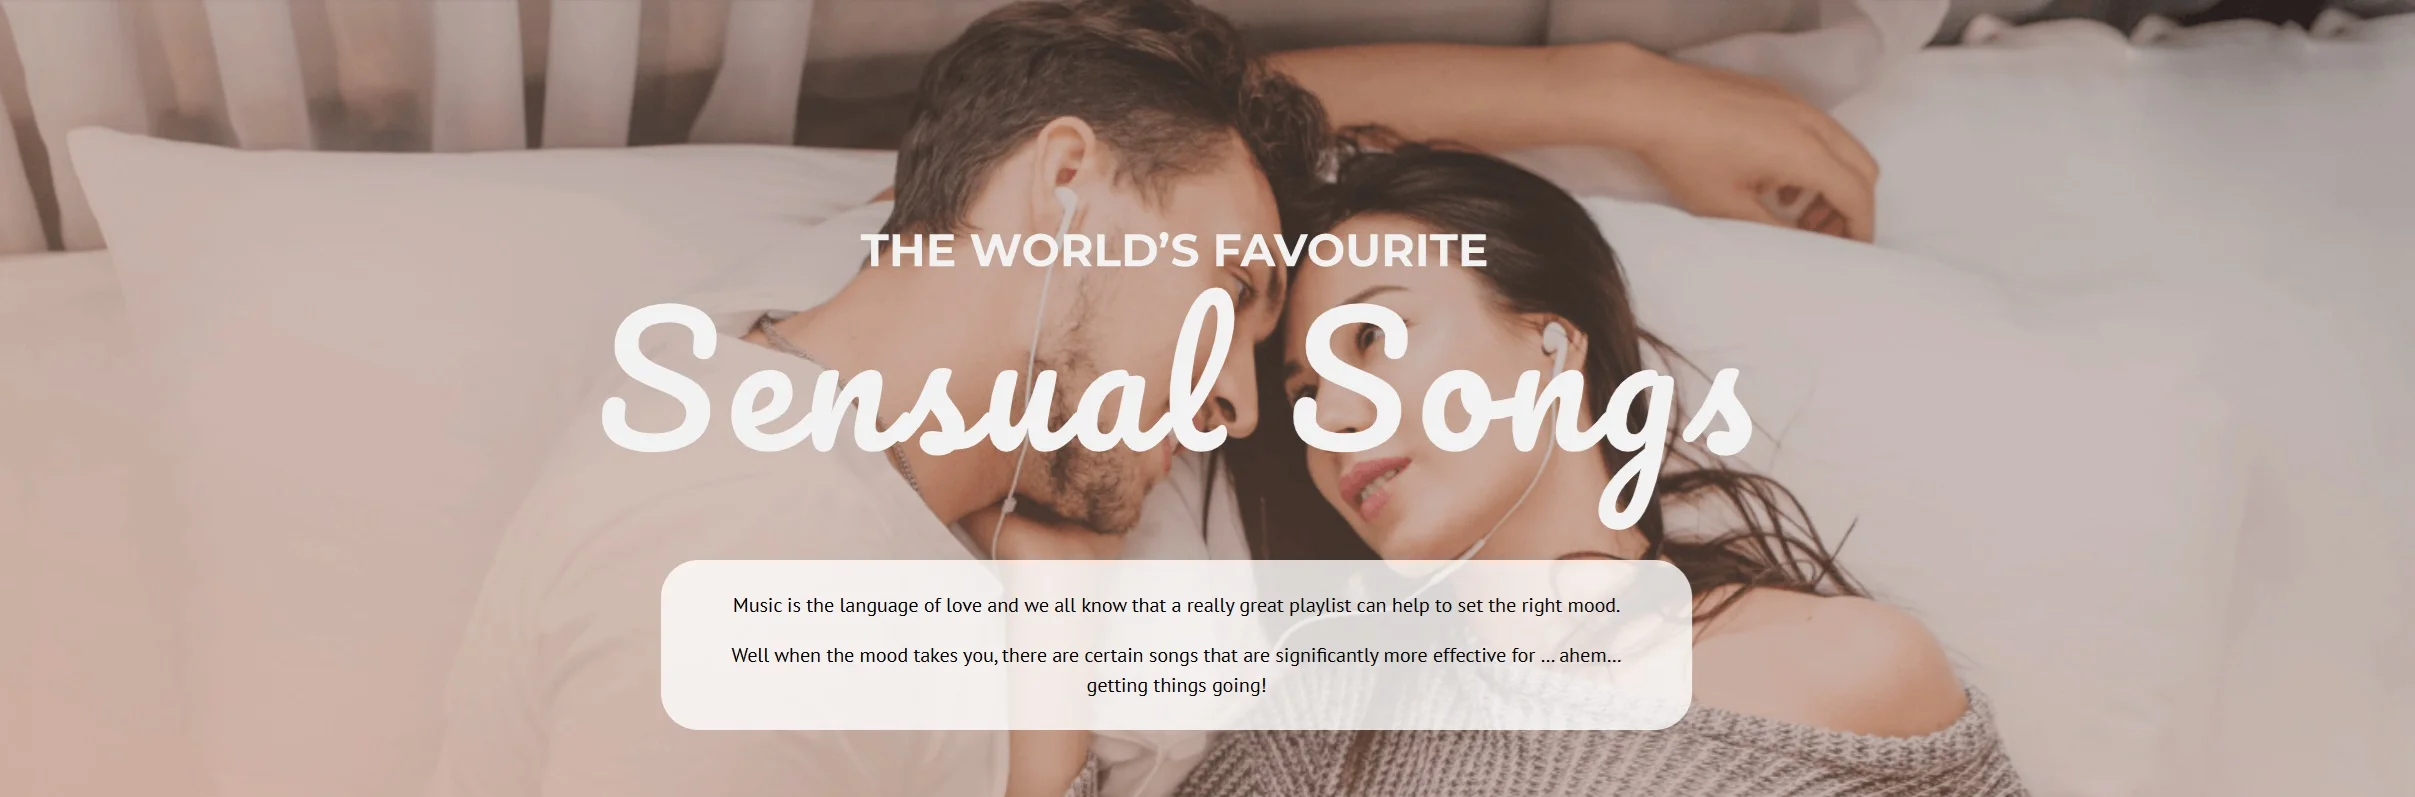 The World's Favourite Sensual Songs